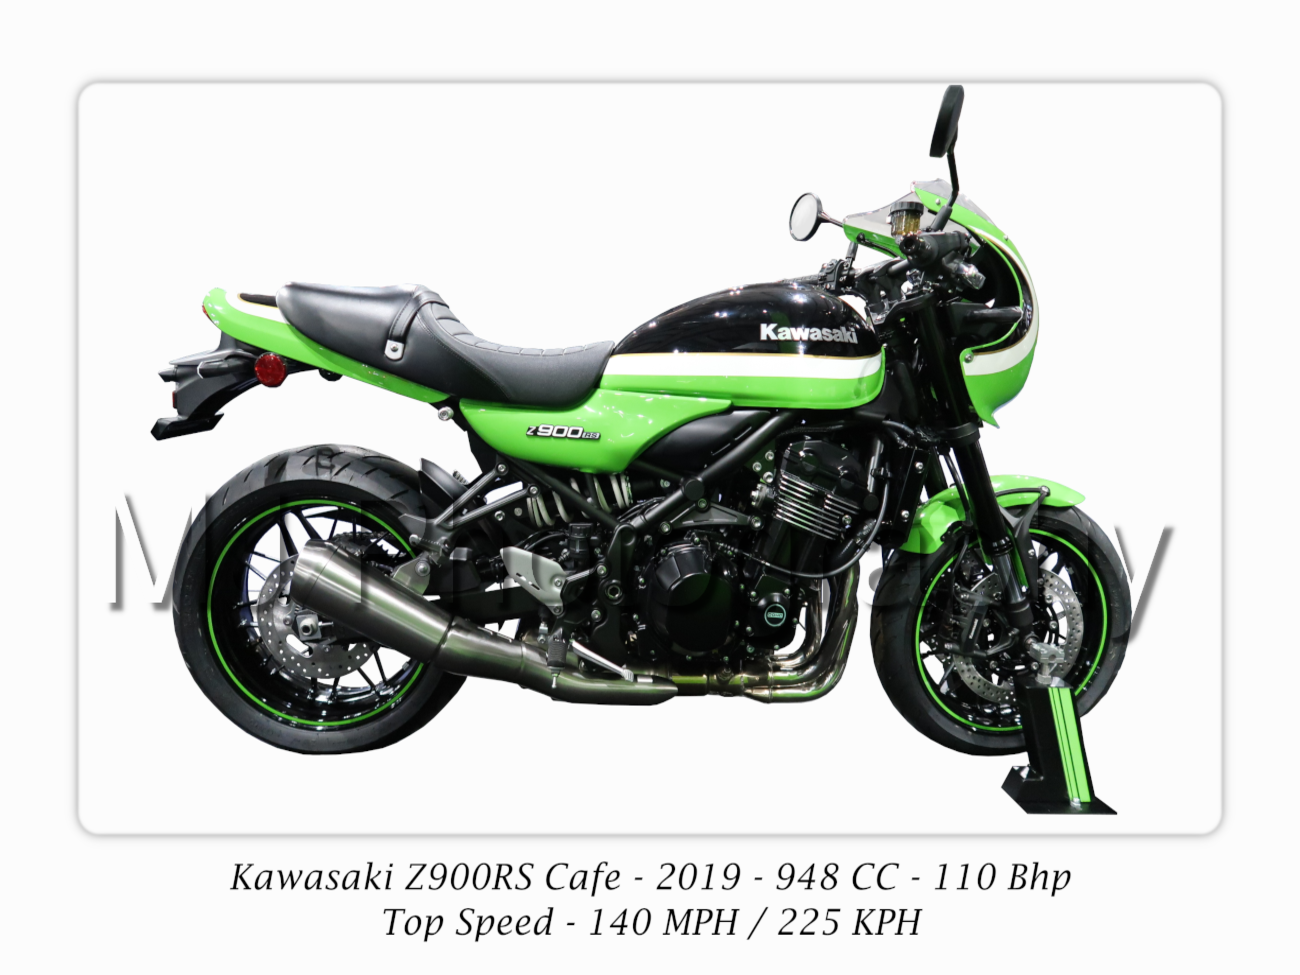 Kawasaki Z900RS Cafe Motorcycle A3/A4 Size Print Poster on Photographic Paper